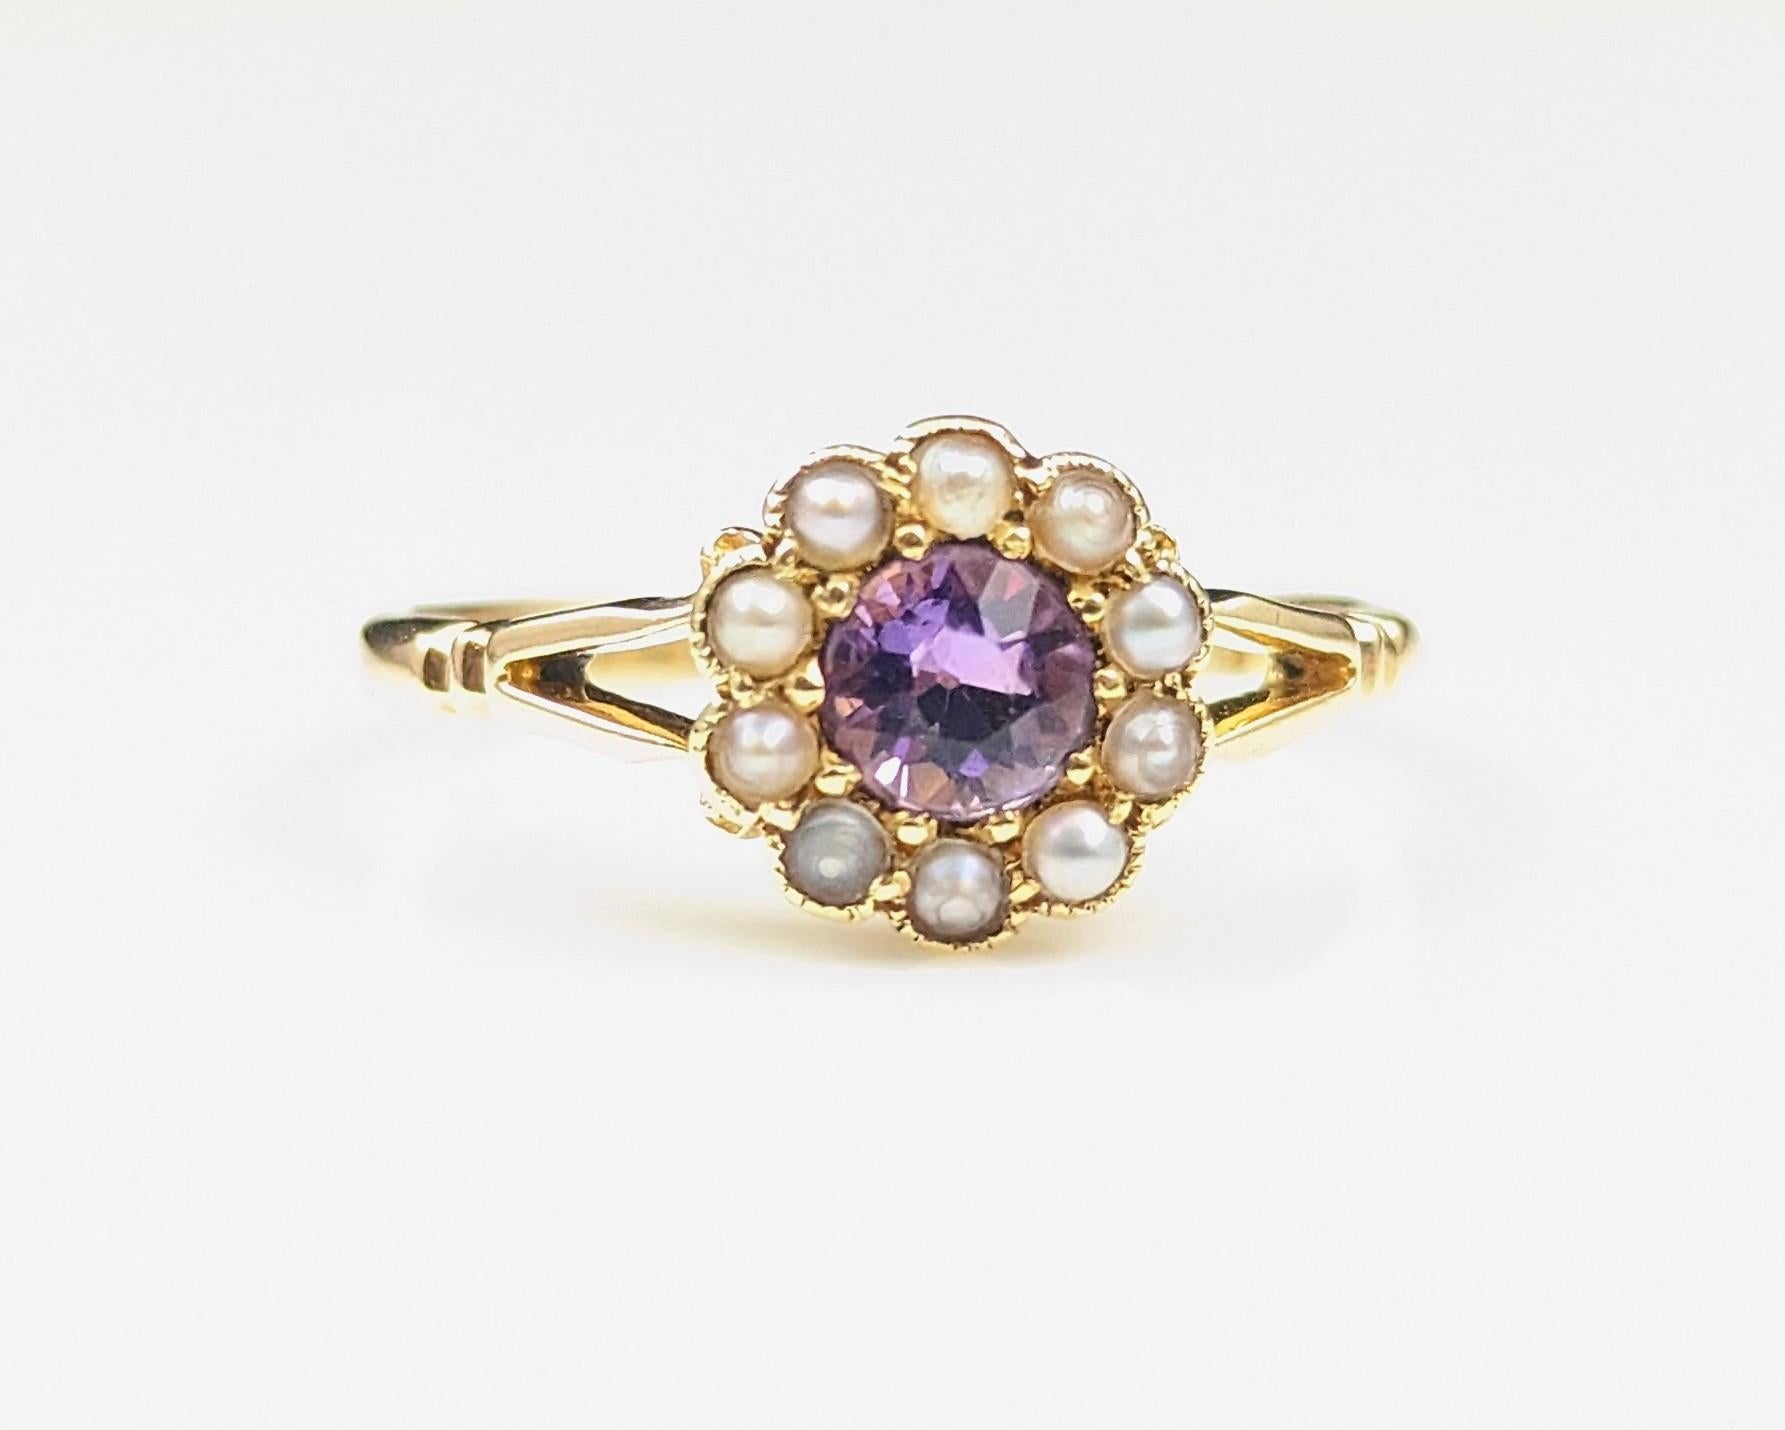 Antique 18k Gold Amethyst and Pearl Cluster Ring, Floral For Sale 4